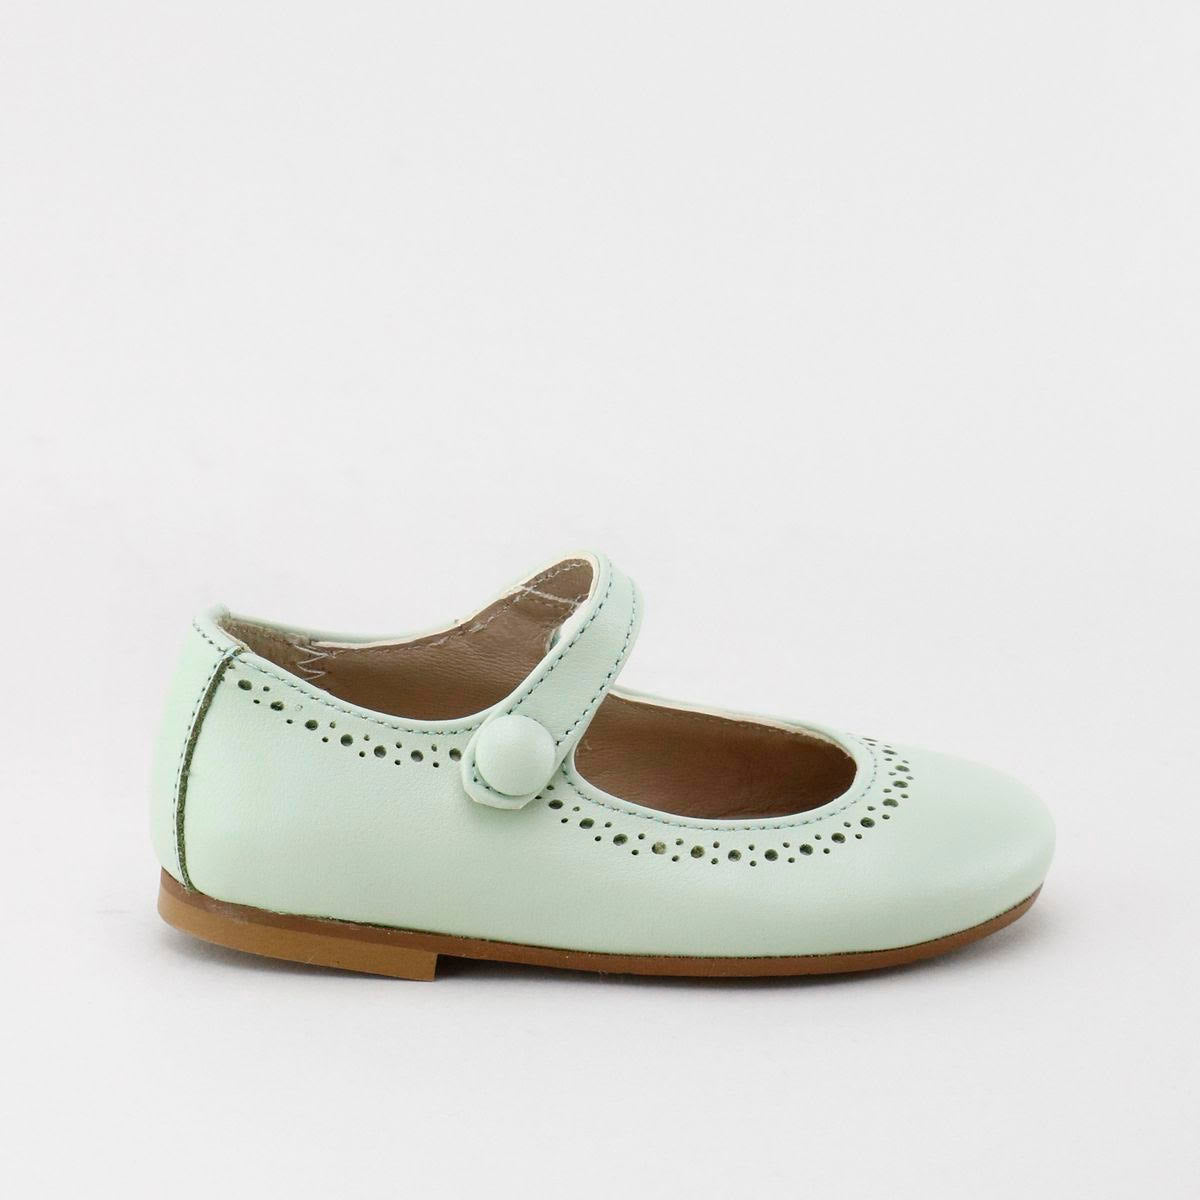 PAPANATAS MINT GREEN LEATHER DOTTED DESIGN ROUNDED MARY JANE